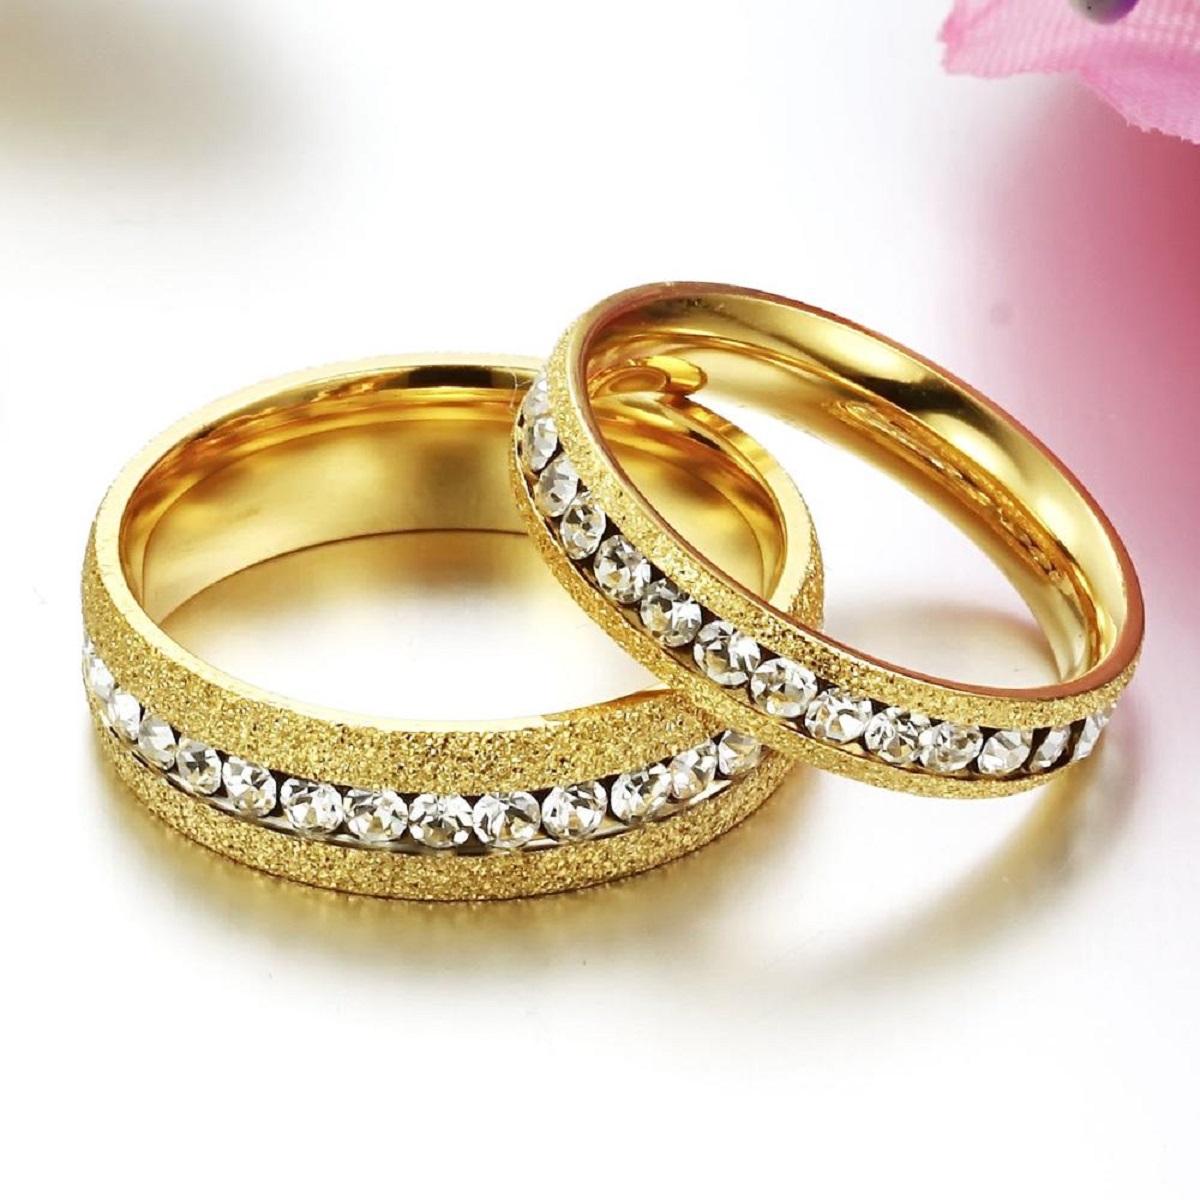 Pinterest ~ elana ☆ | Fancy jewelry, Gold ring designs, Hand jewelry rings